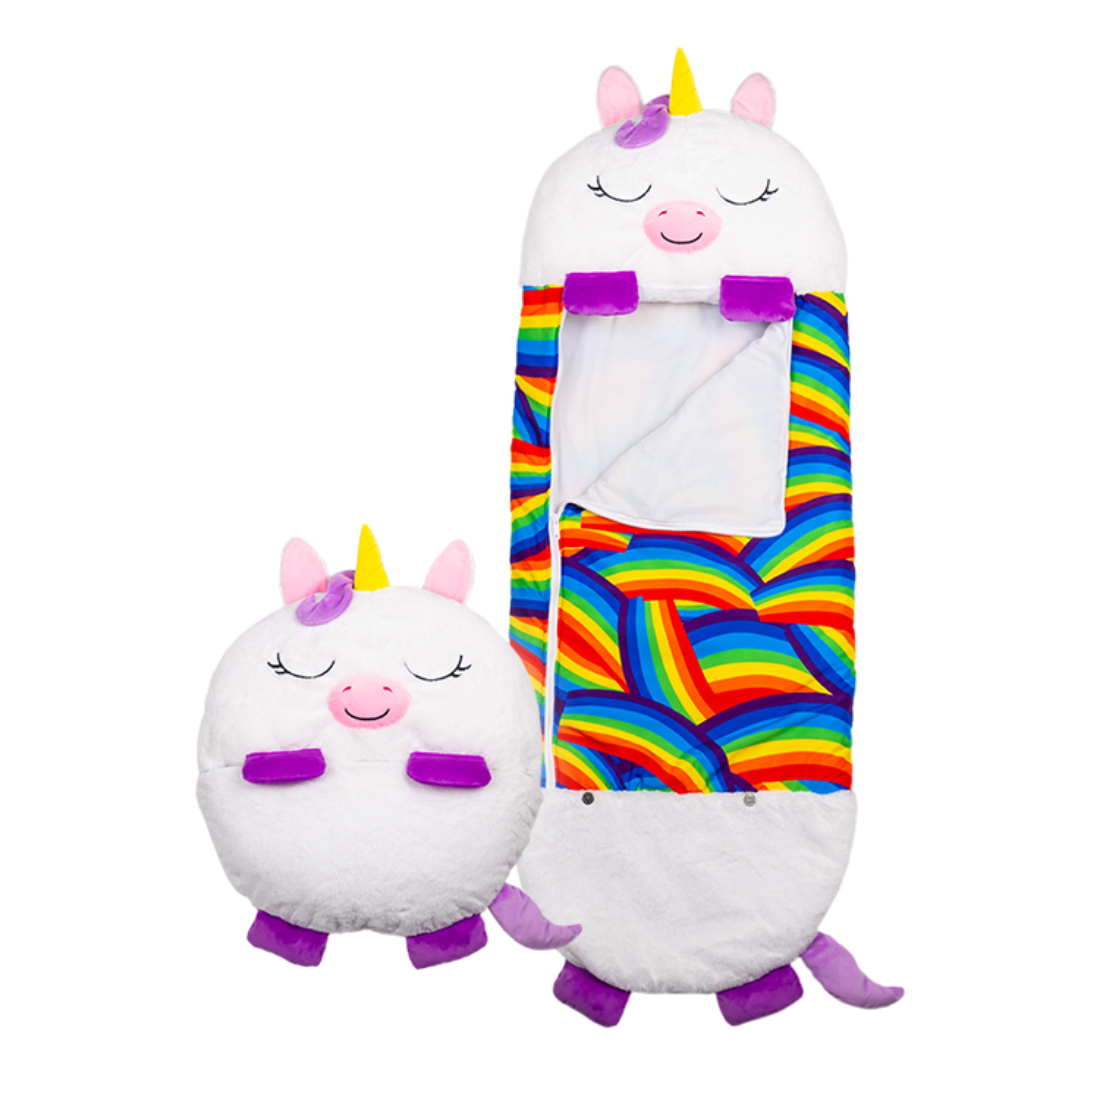 View Happy Nappers Unicorn Large Ages 7 Plush Toy That Opens To A Fun Sleeping Bag High Street TV information